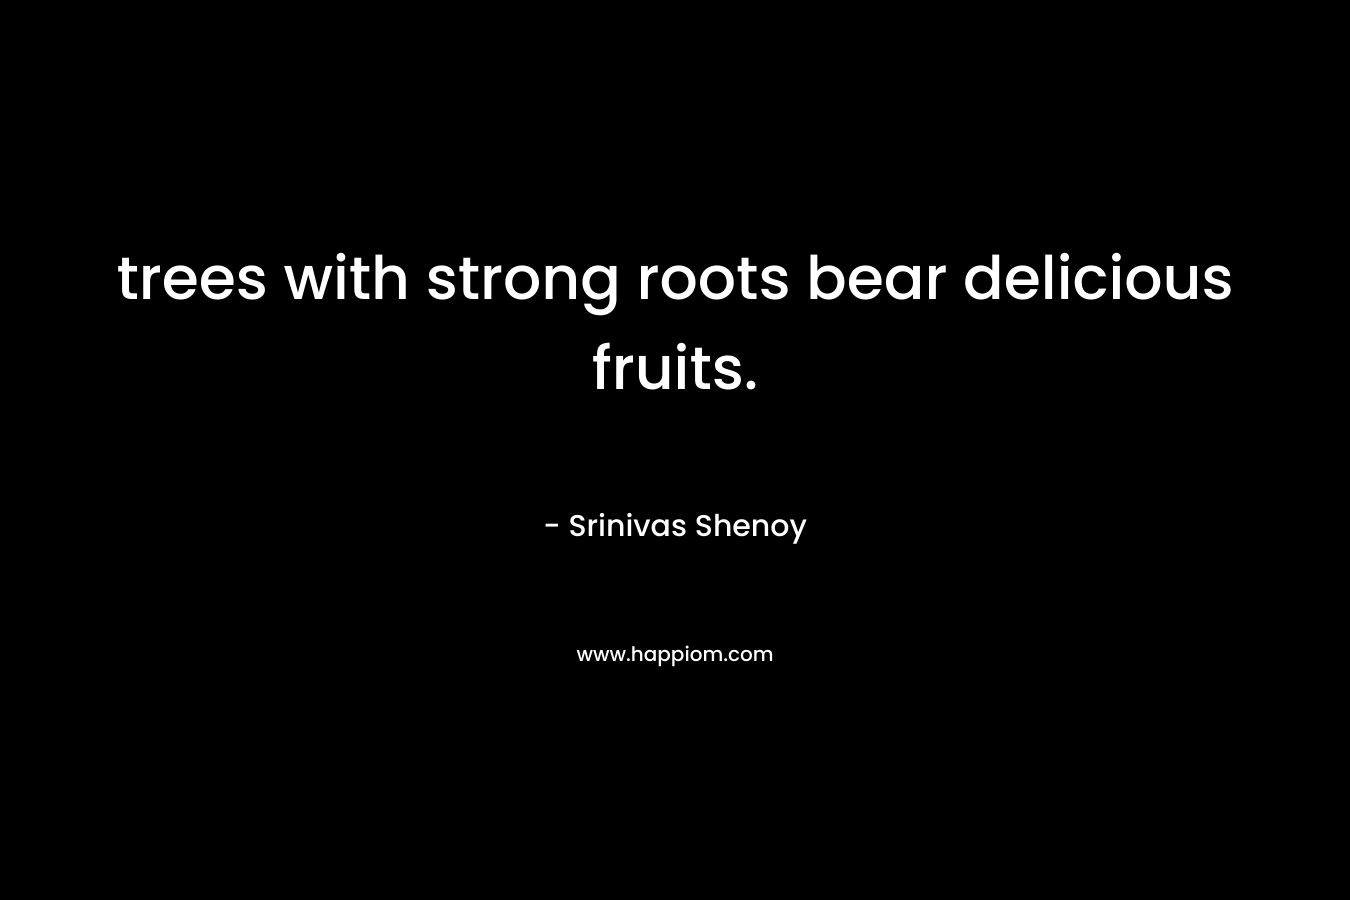 trees with strong roots bear delicious fruits. – Srinivas Shenoy